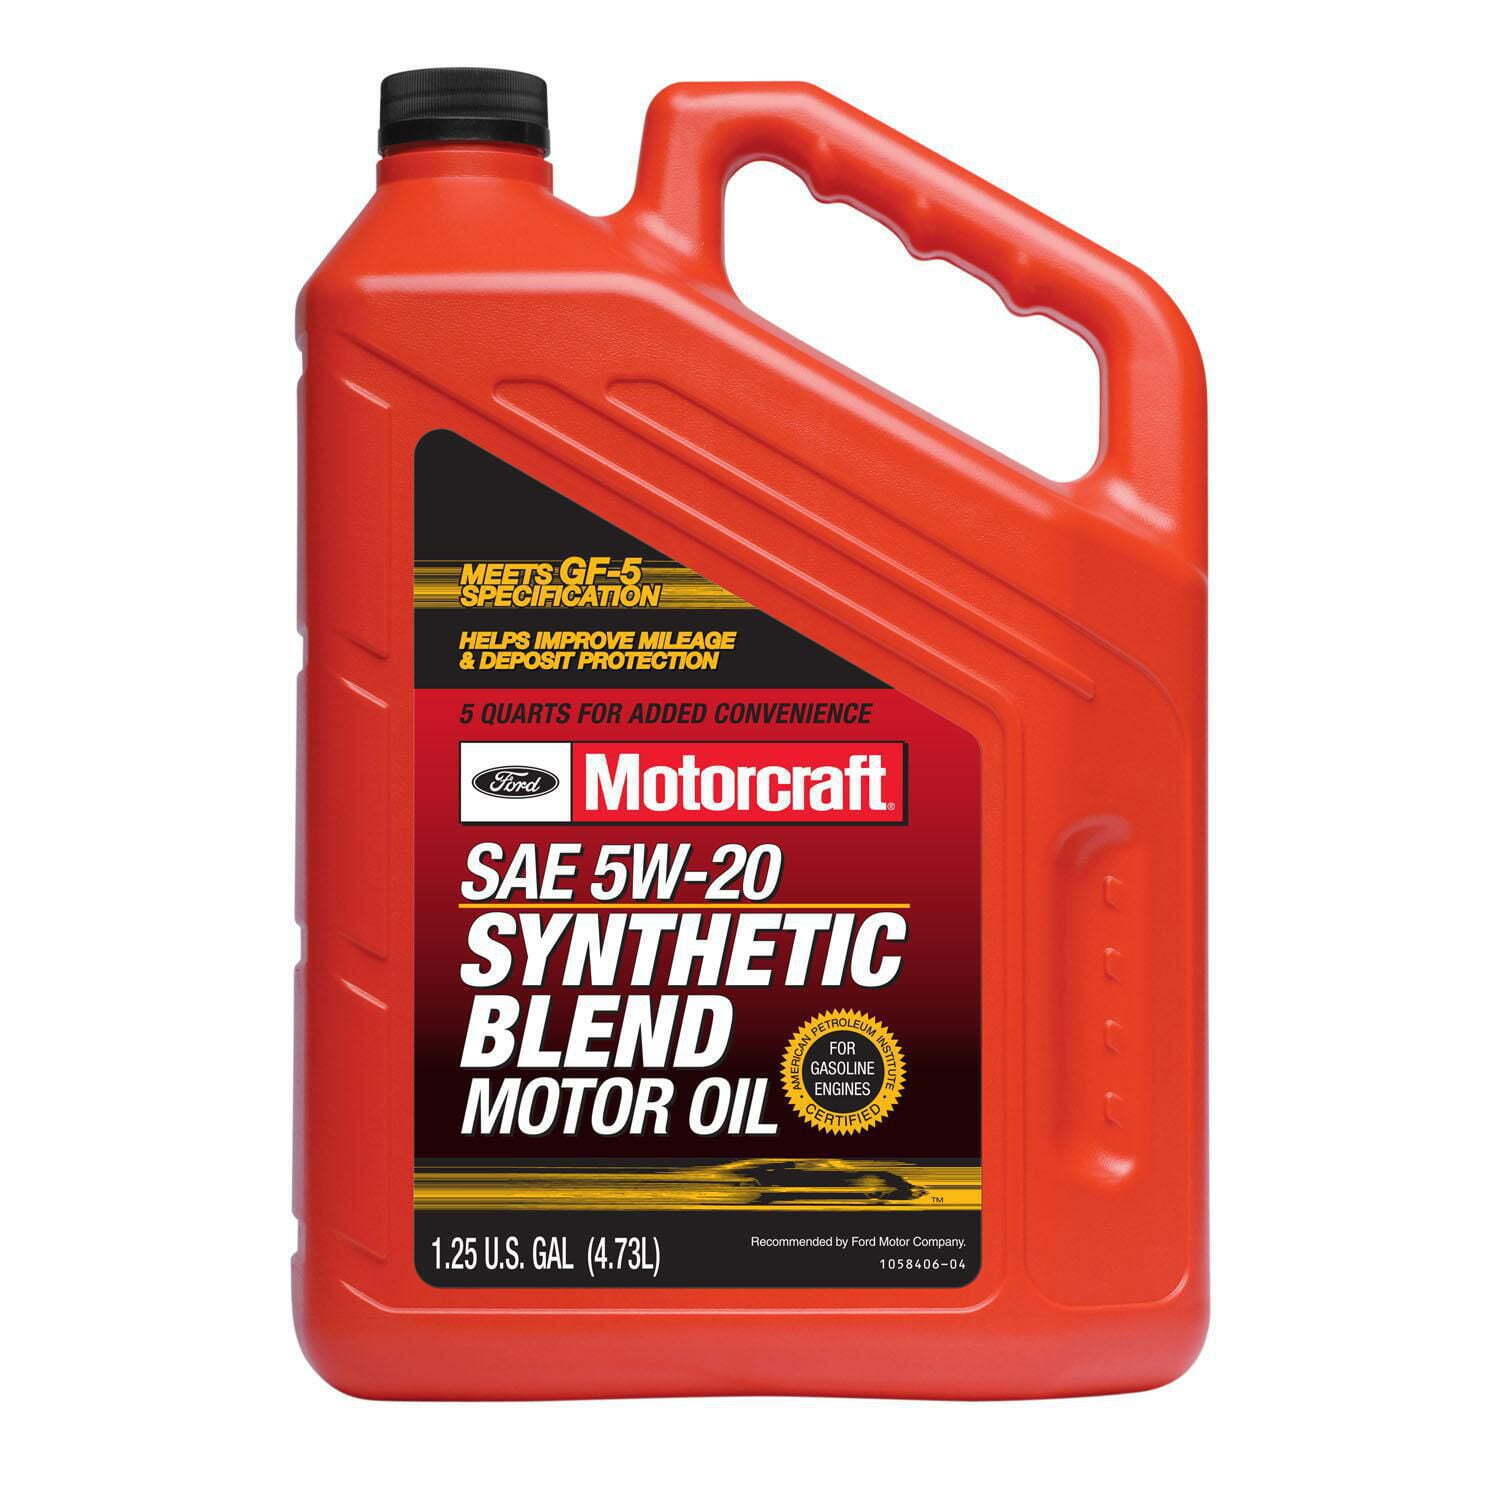 Motorcraft Synthetic Blend Motor Oil, 5W-20, 5 quart jug, sold by each